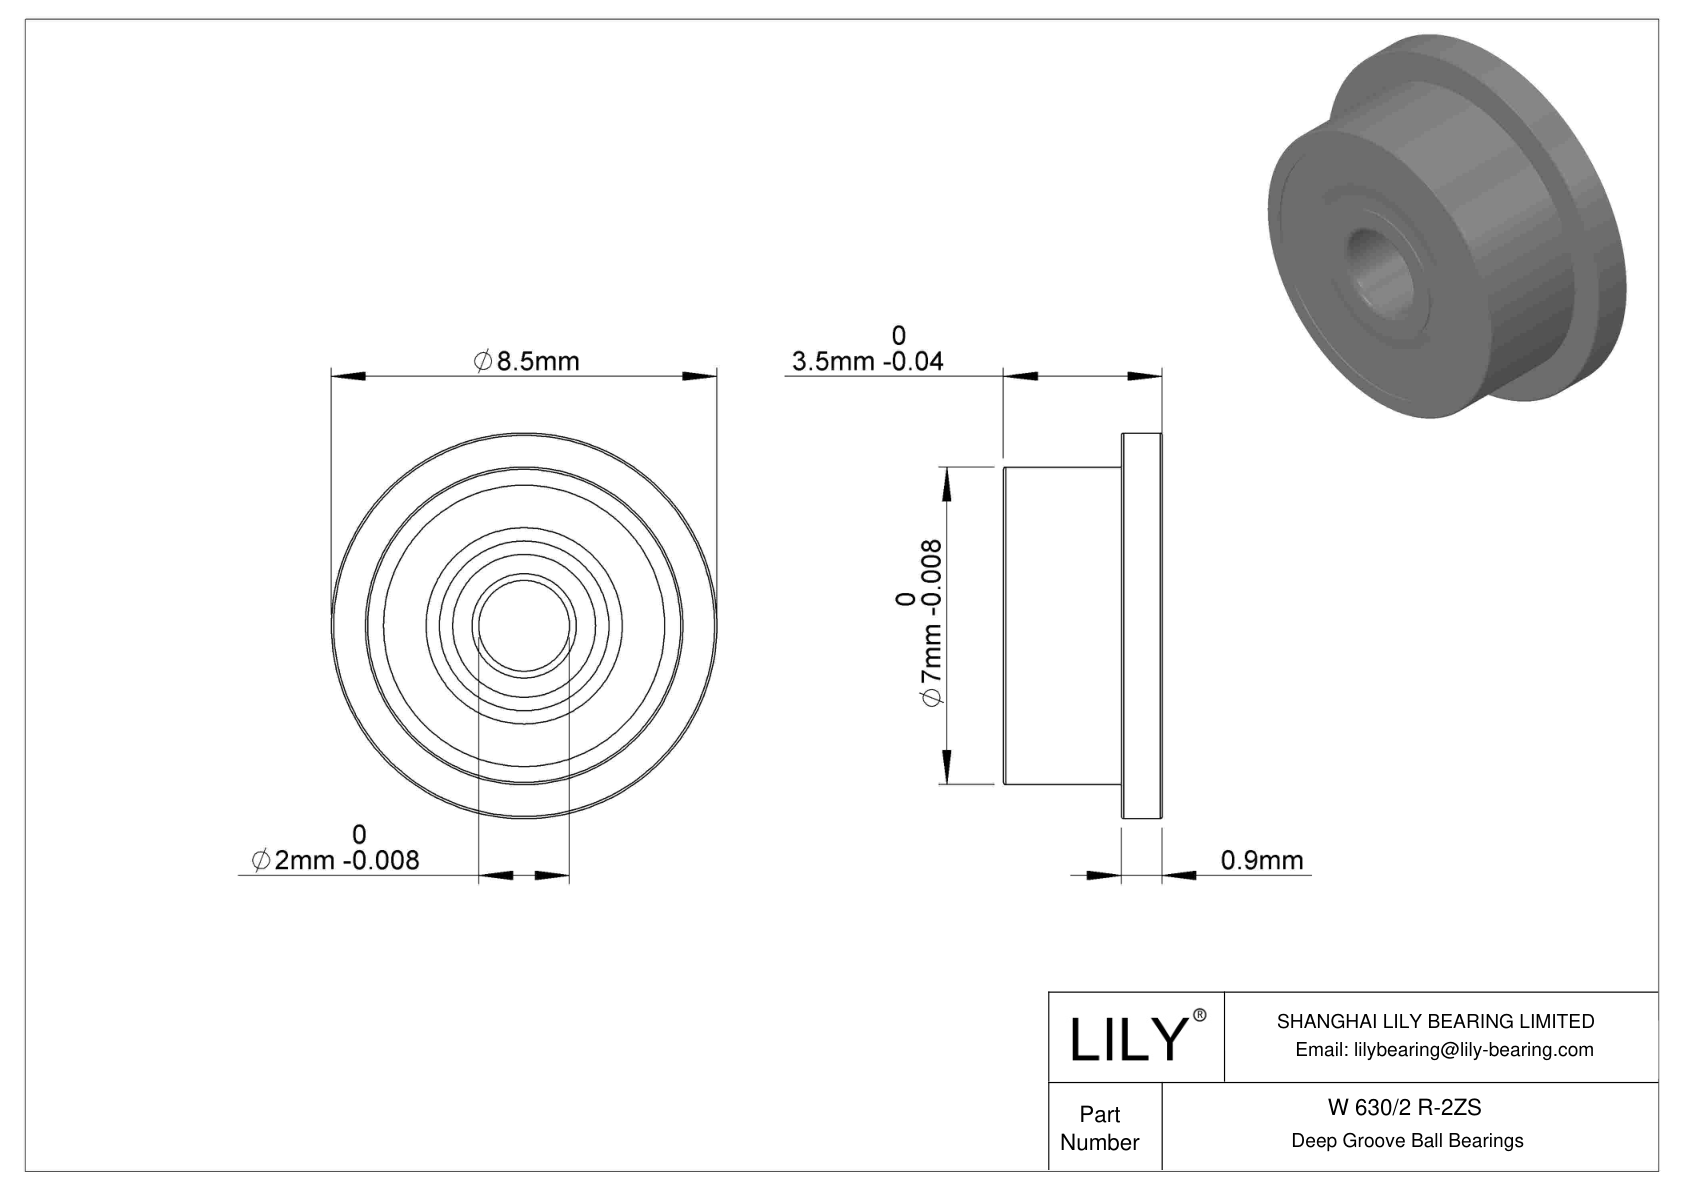 W 630/2 R-2ZS Flanged Ball Bearings cad drawing